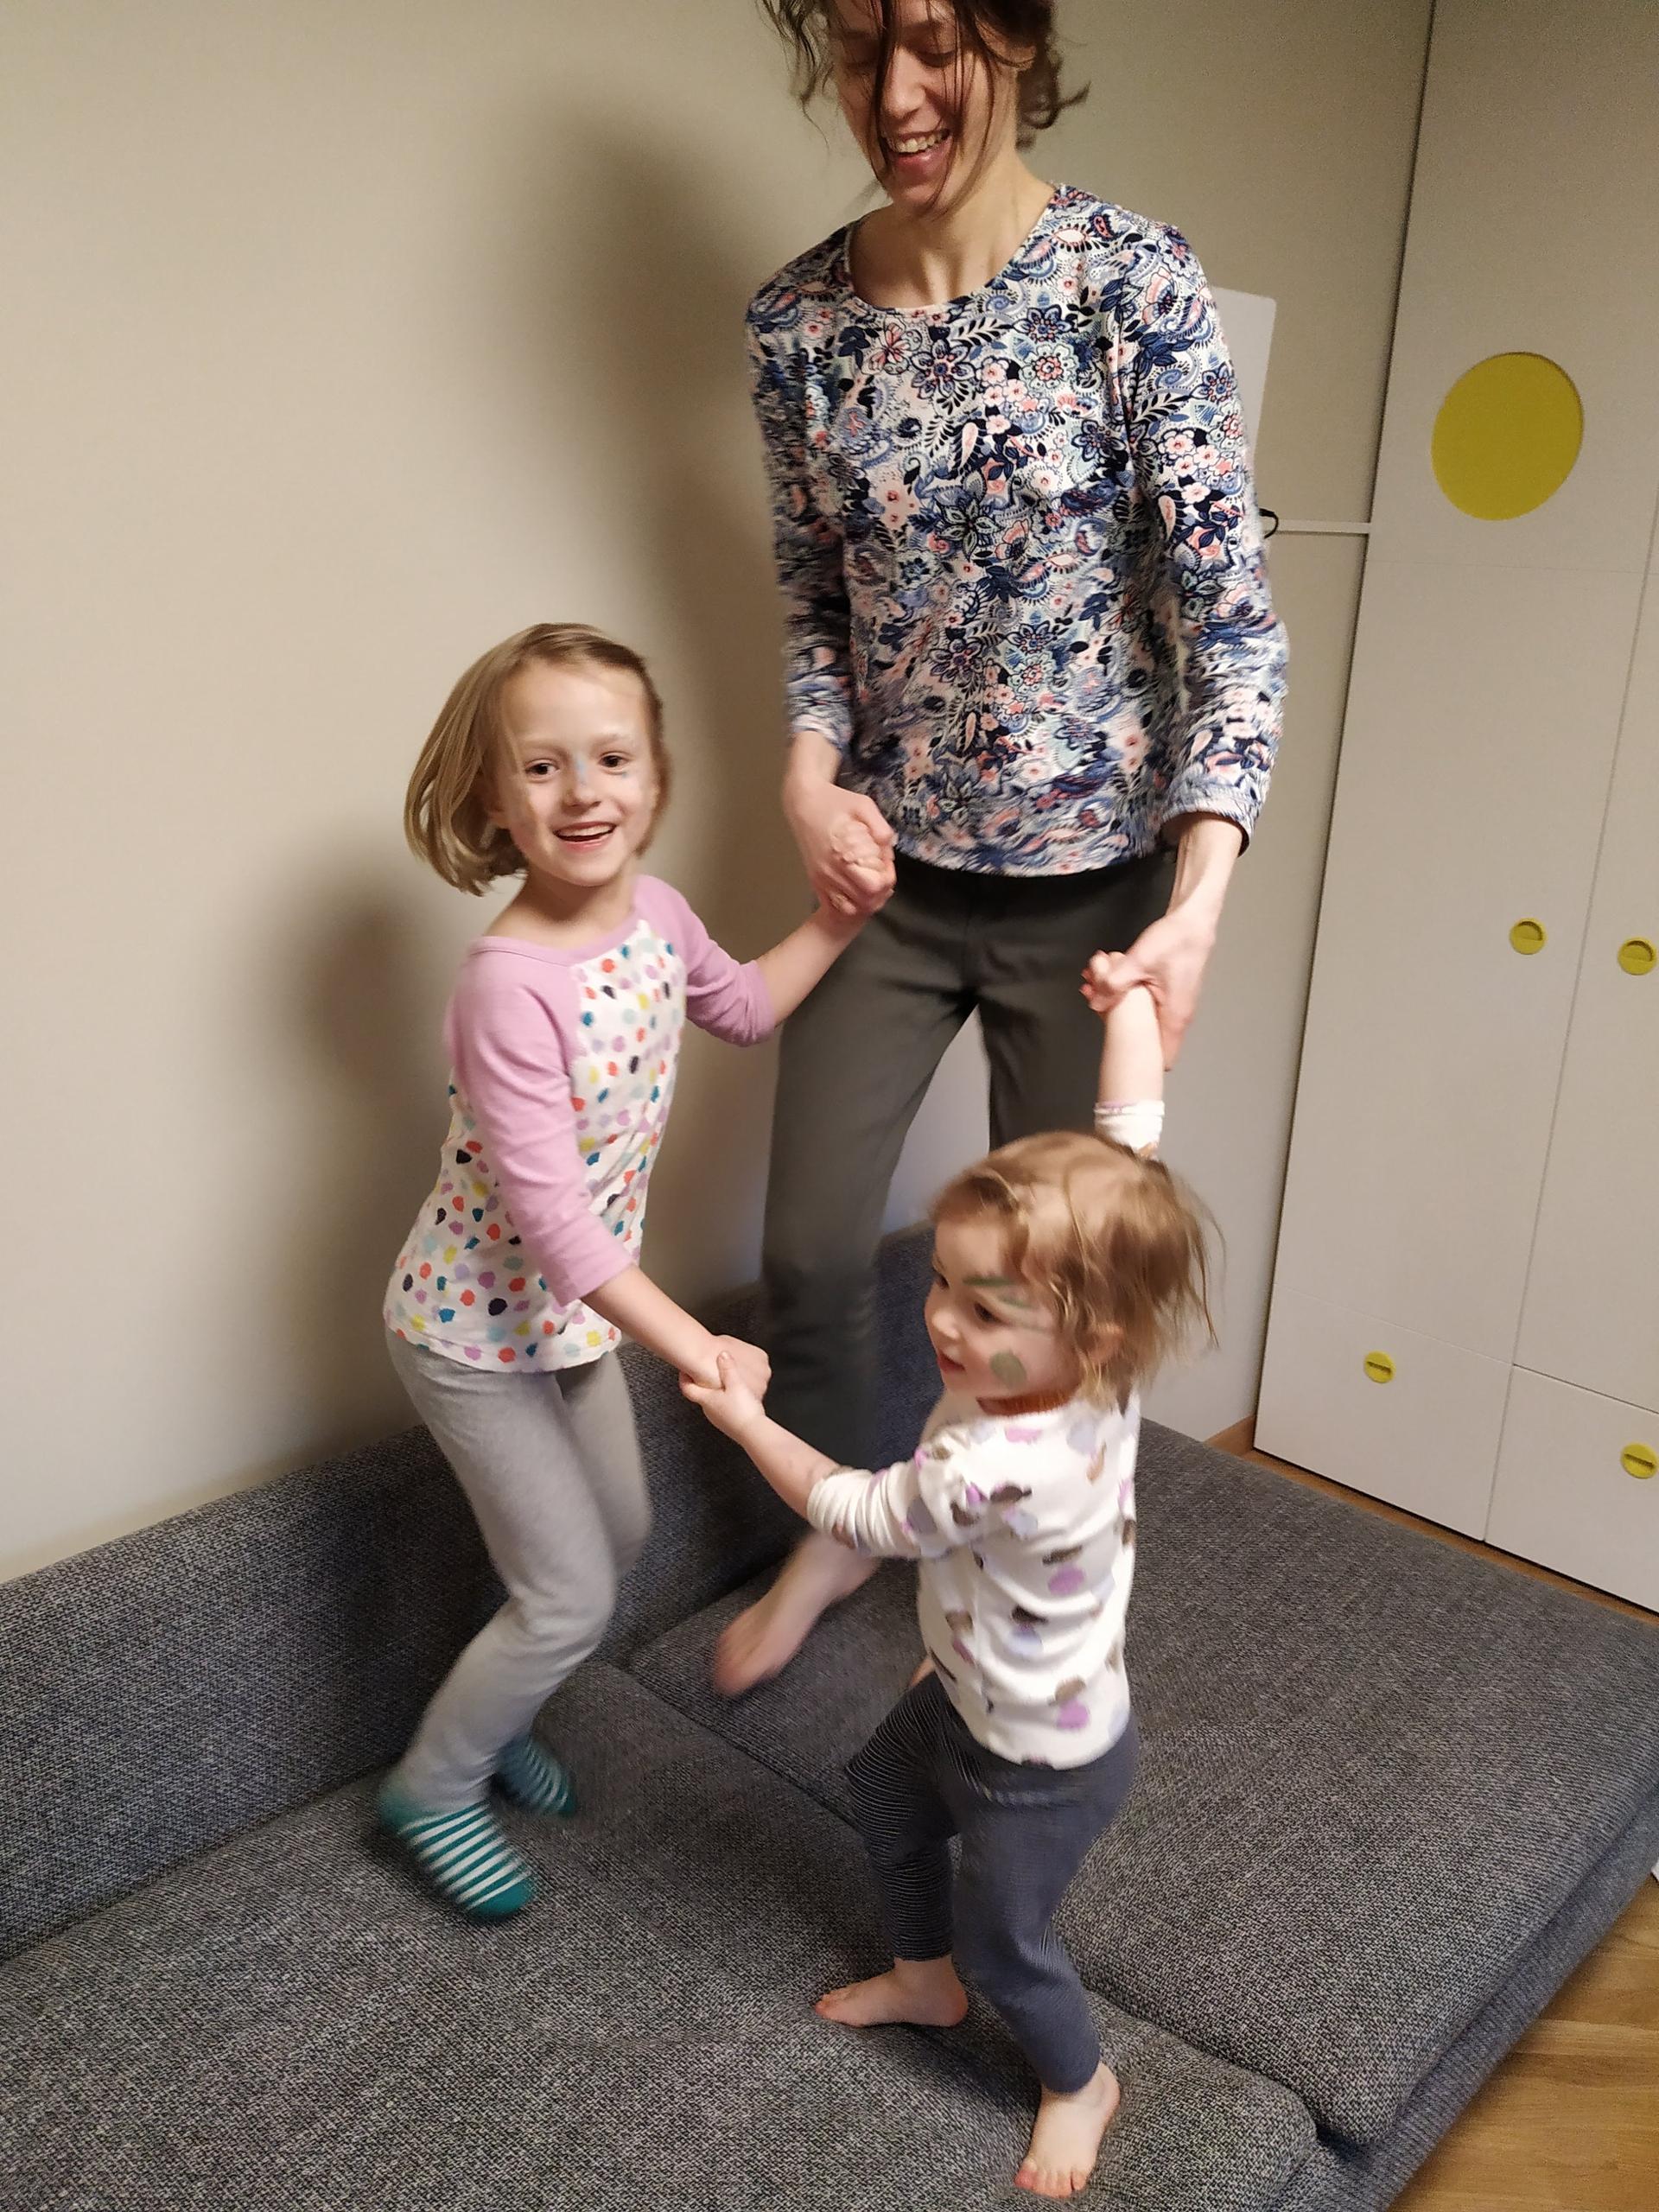 Eglė Merkyte holds an impromptu dance party on their couch in Lithuania with her daughters, Unė and Bruknė Kubiliūtė.